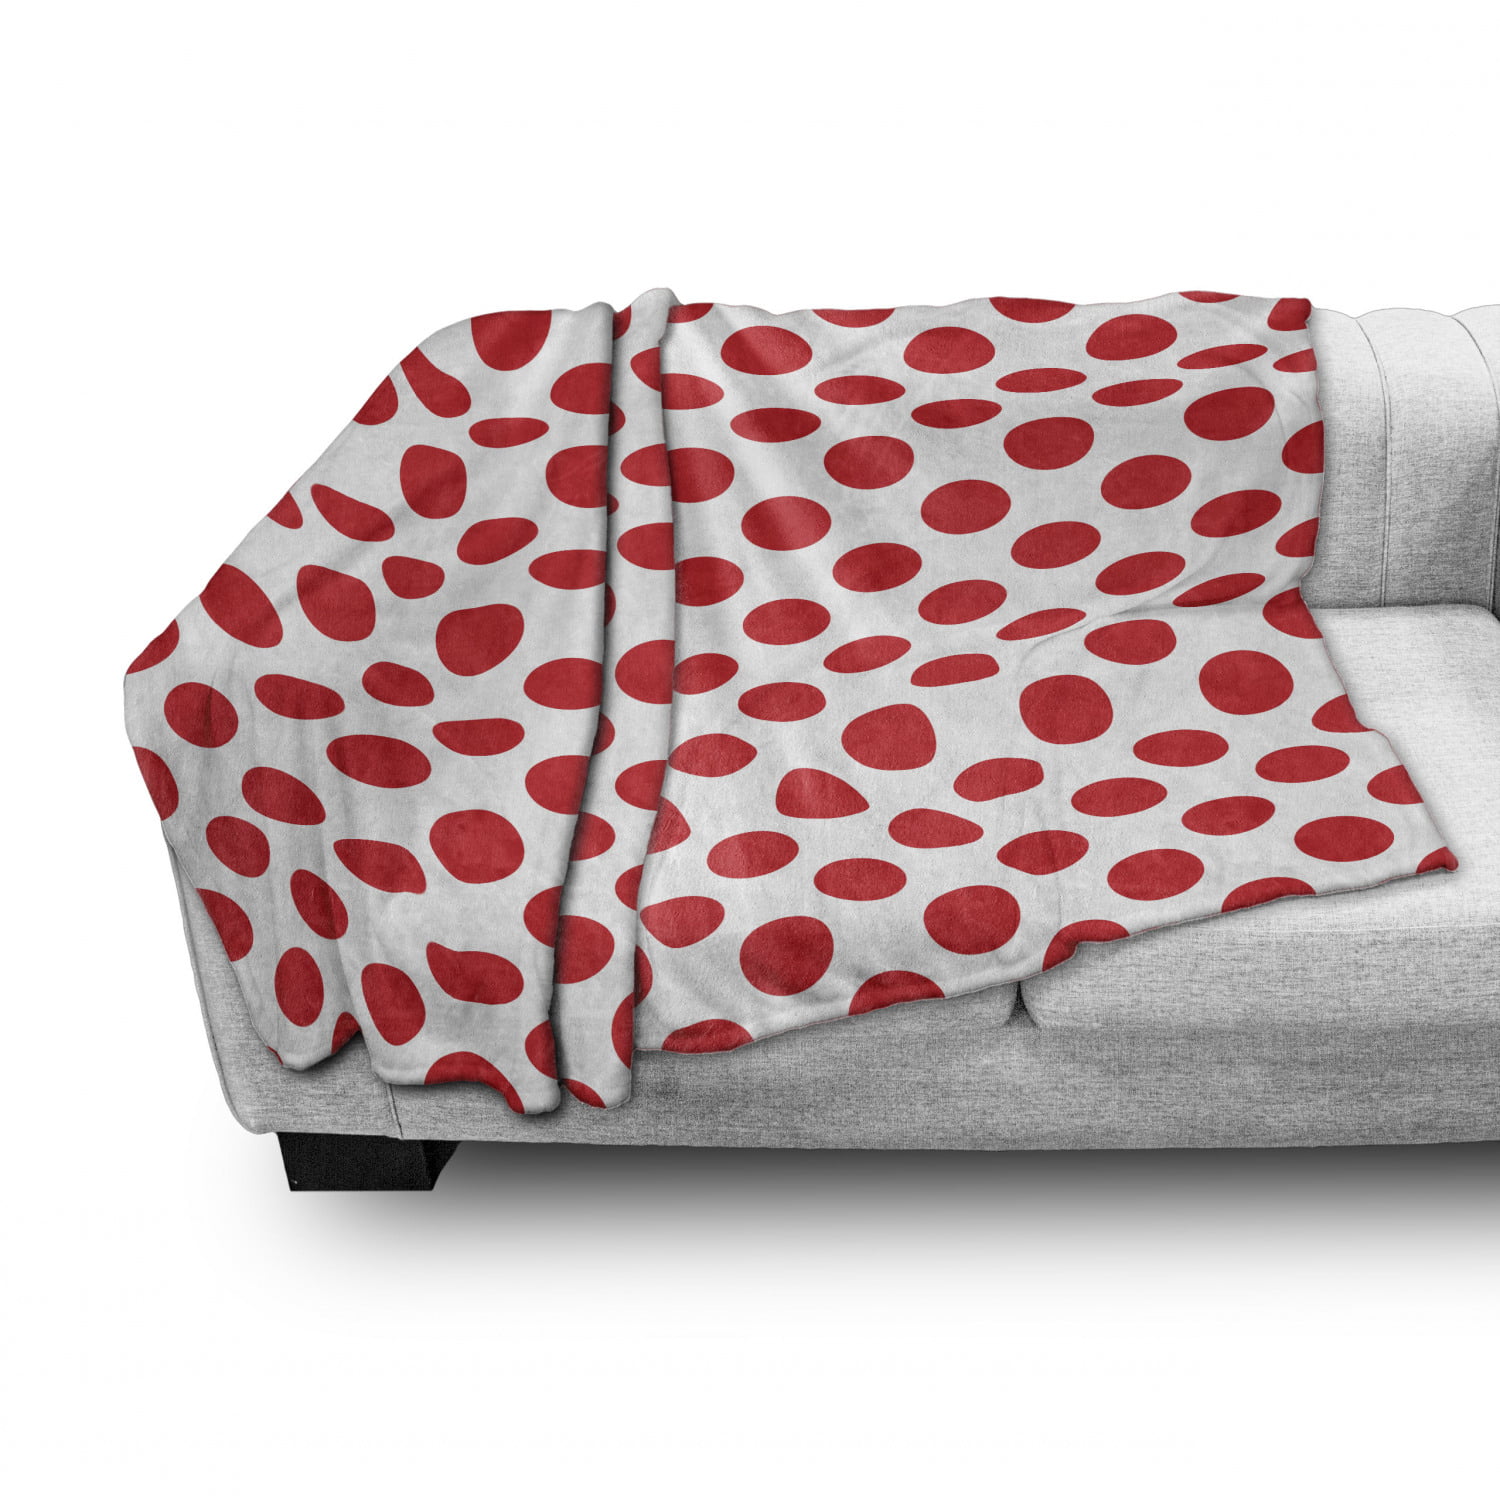 Scarlet White Ambesonne Geometric Soft Flannel Fleece Throw Blanket 50s 60s Old Pop Art Retro Vintage Polka Dots Rounds Circles Design Art Print 60 x 80 Cozy Plush for Indoor and Outdoor Use